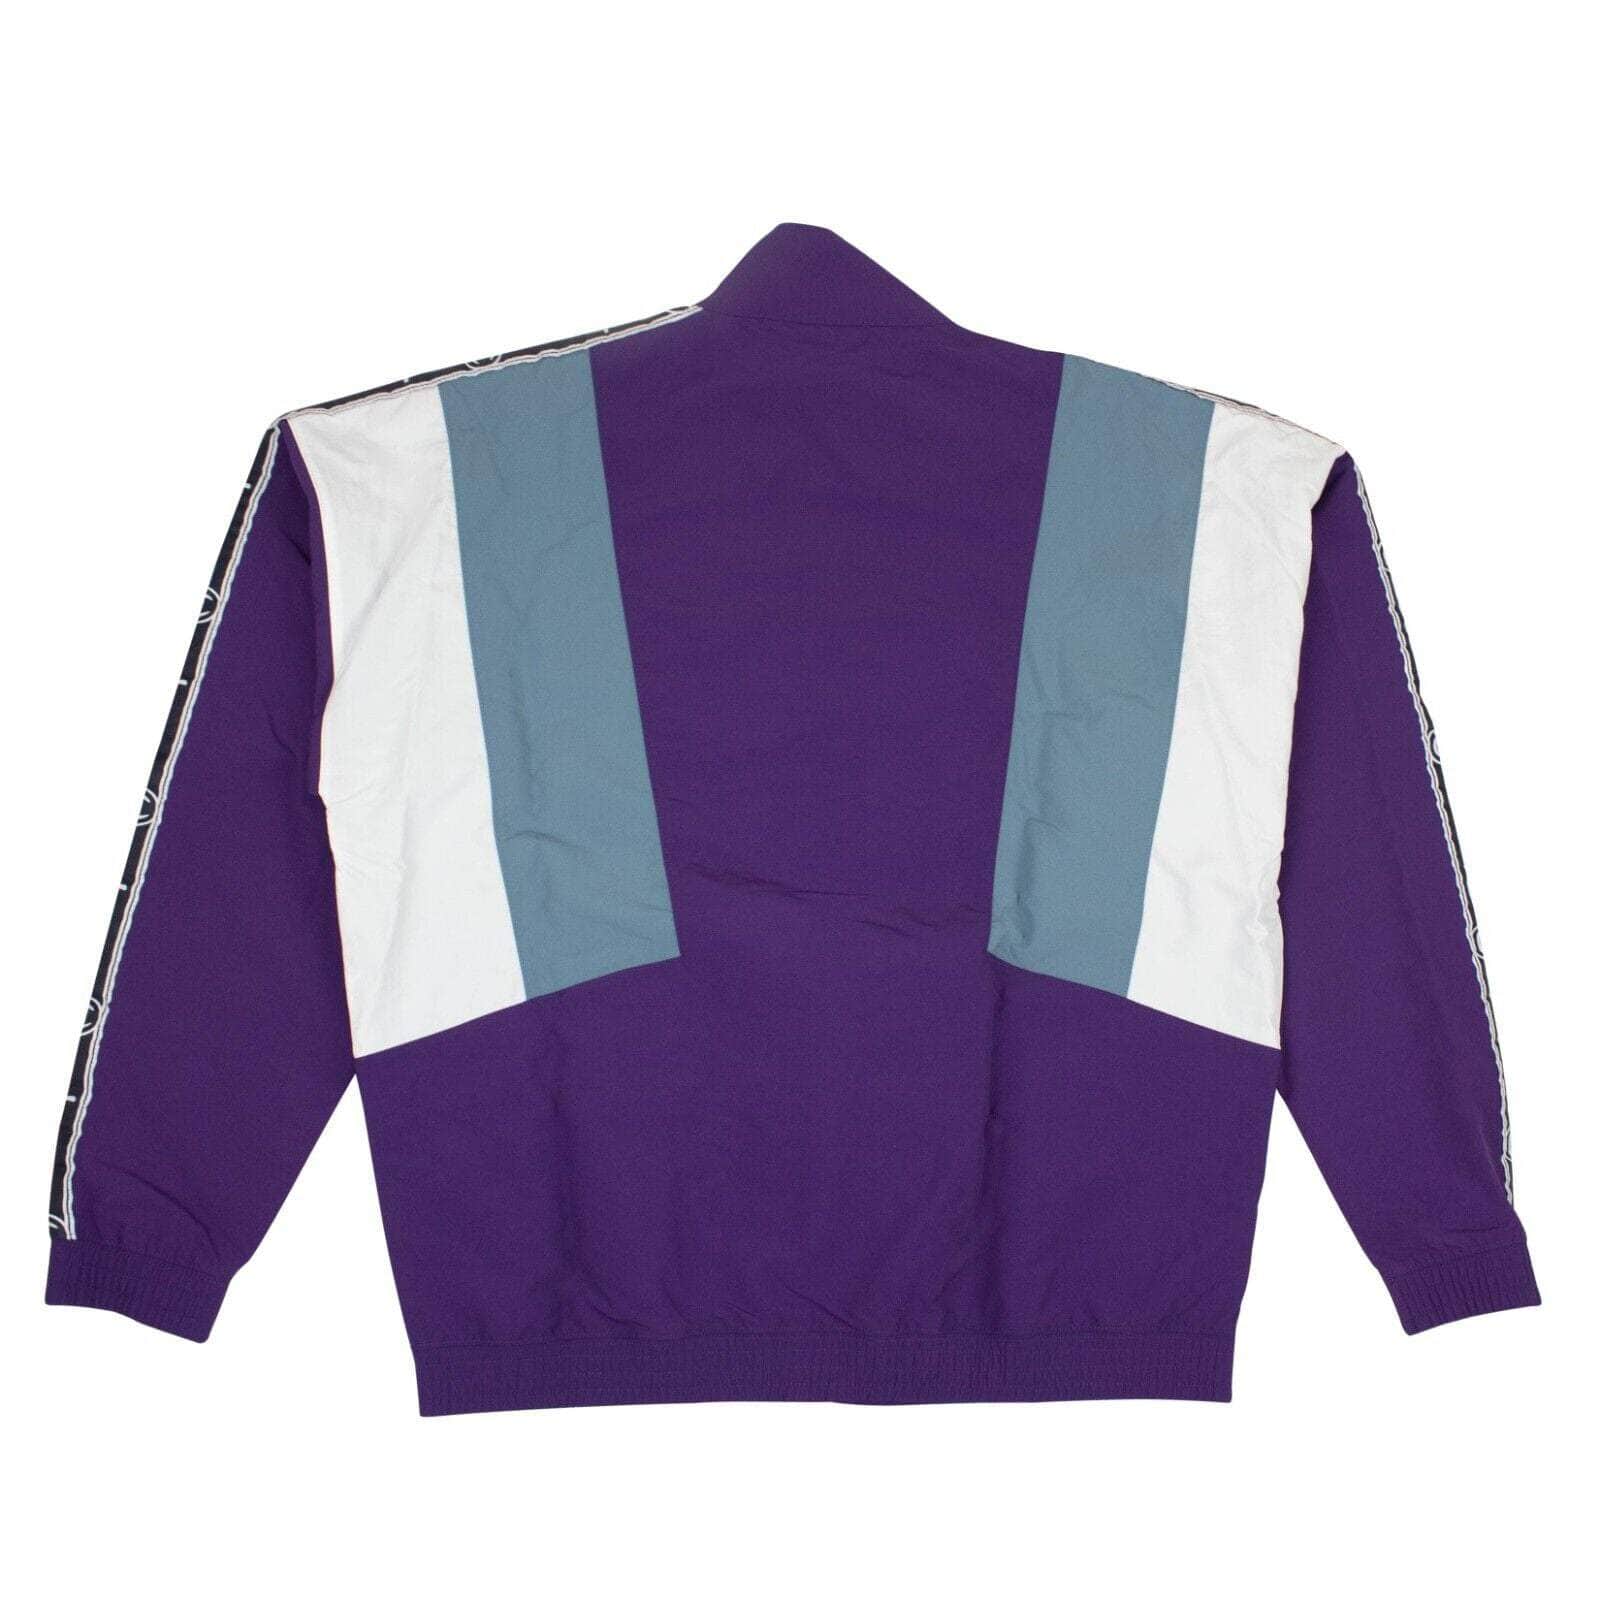 Champion champion, channelenable-all, chicmi, couponcollection, gender-mens, main-clothing, mens-shoes, mens-track-jackets, size-s, under-250 S Purple Zip Embroidered Track Top 95-CHP-1007/S 95-CHP-1007/S